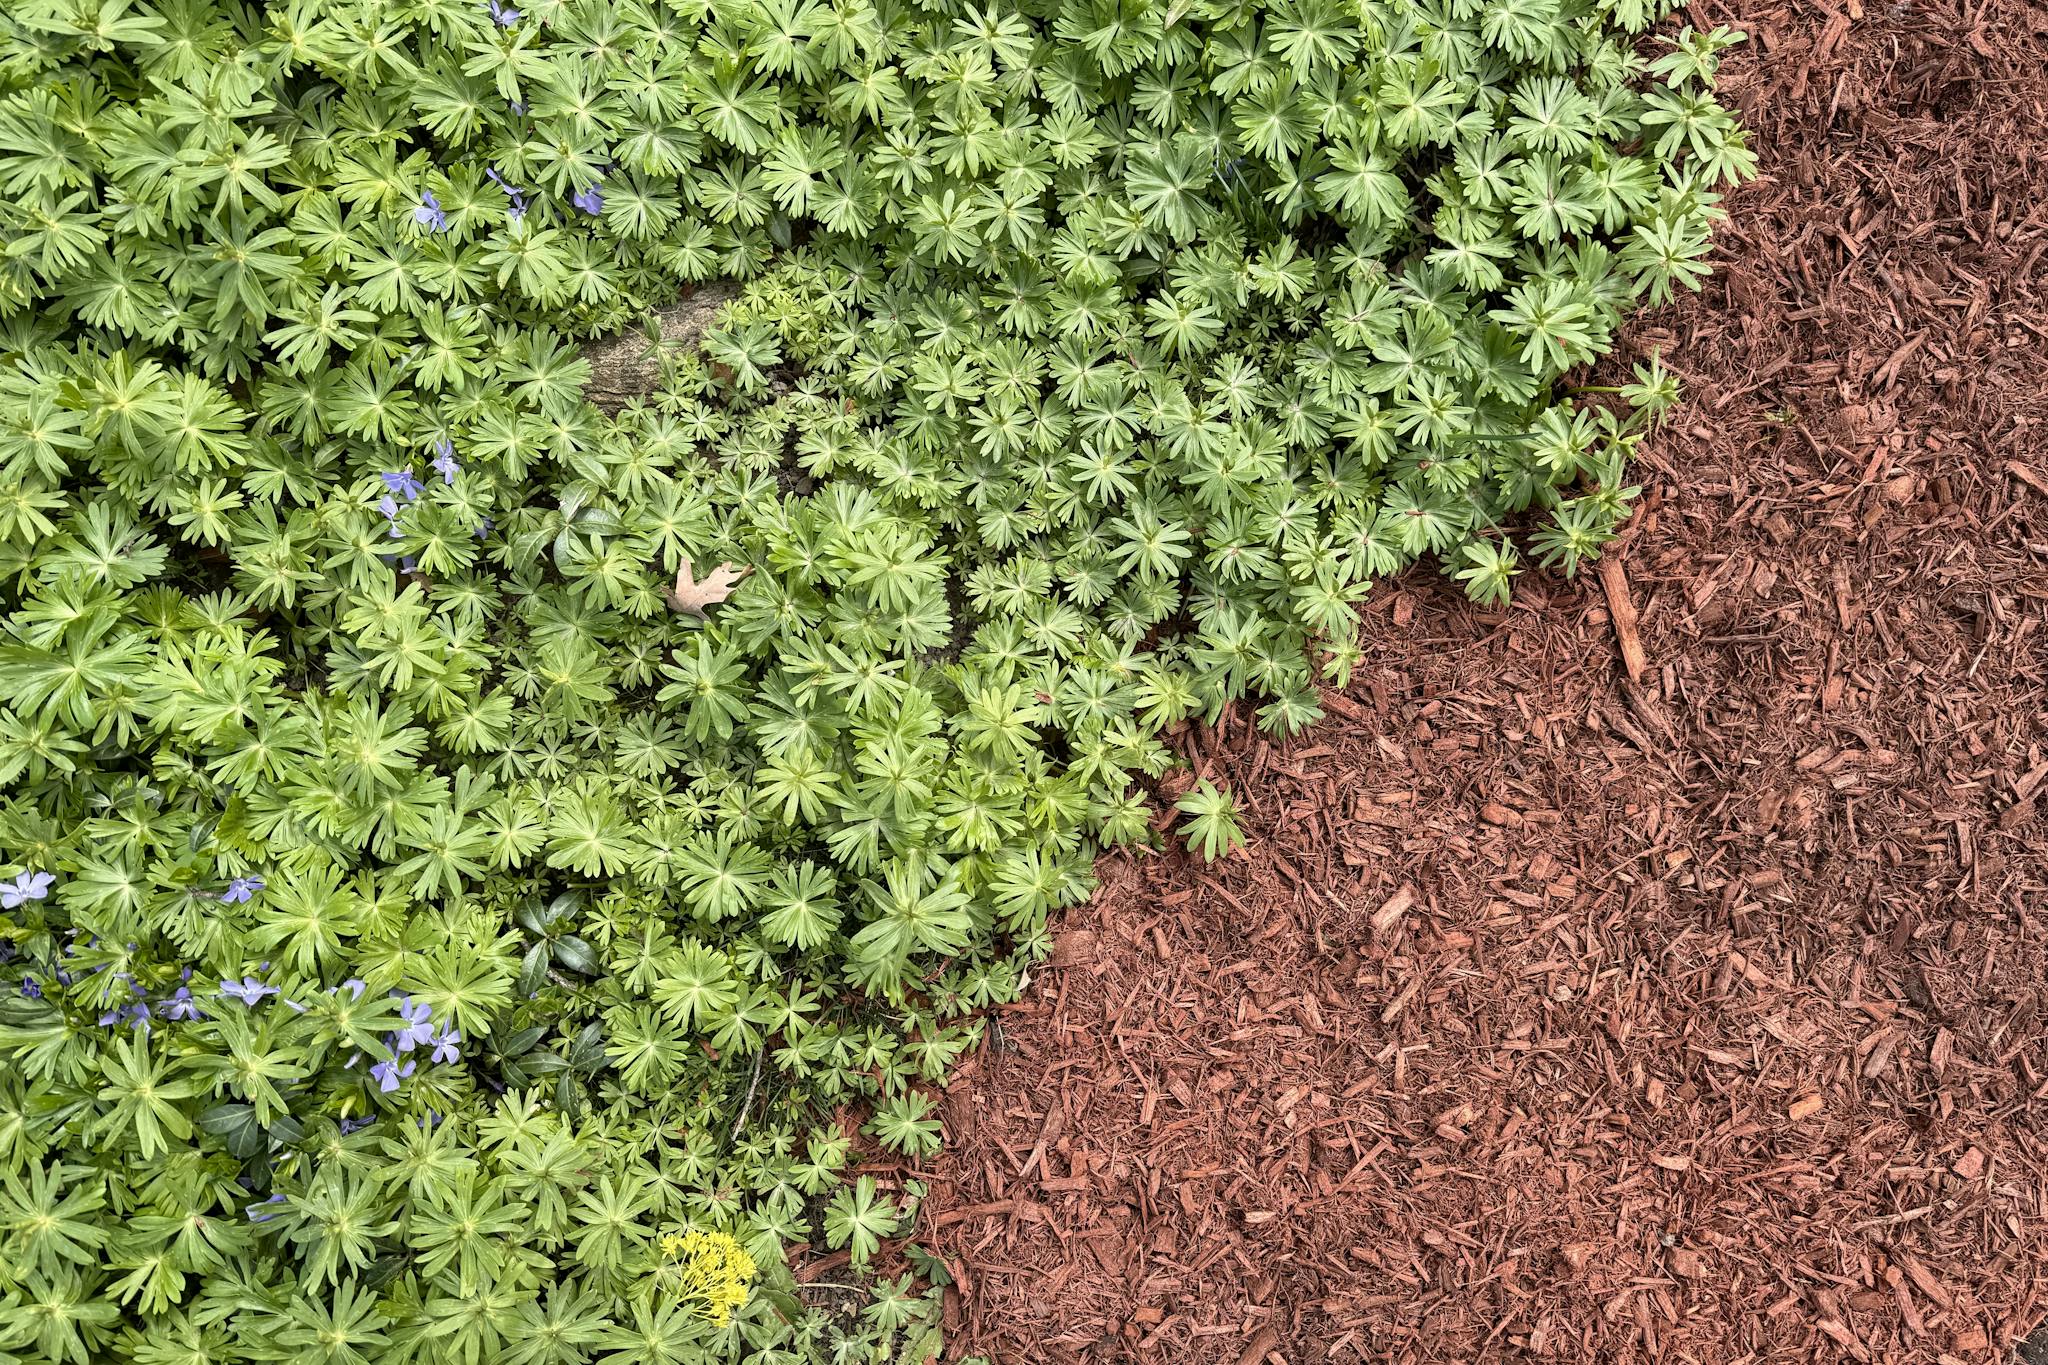 A lush green plant bed borders a swath of rich brown soil